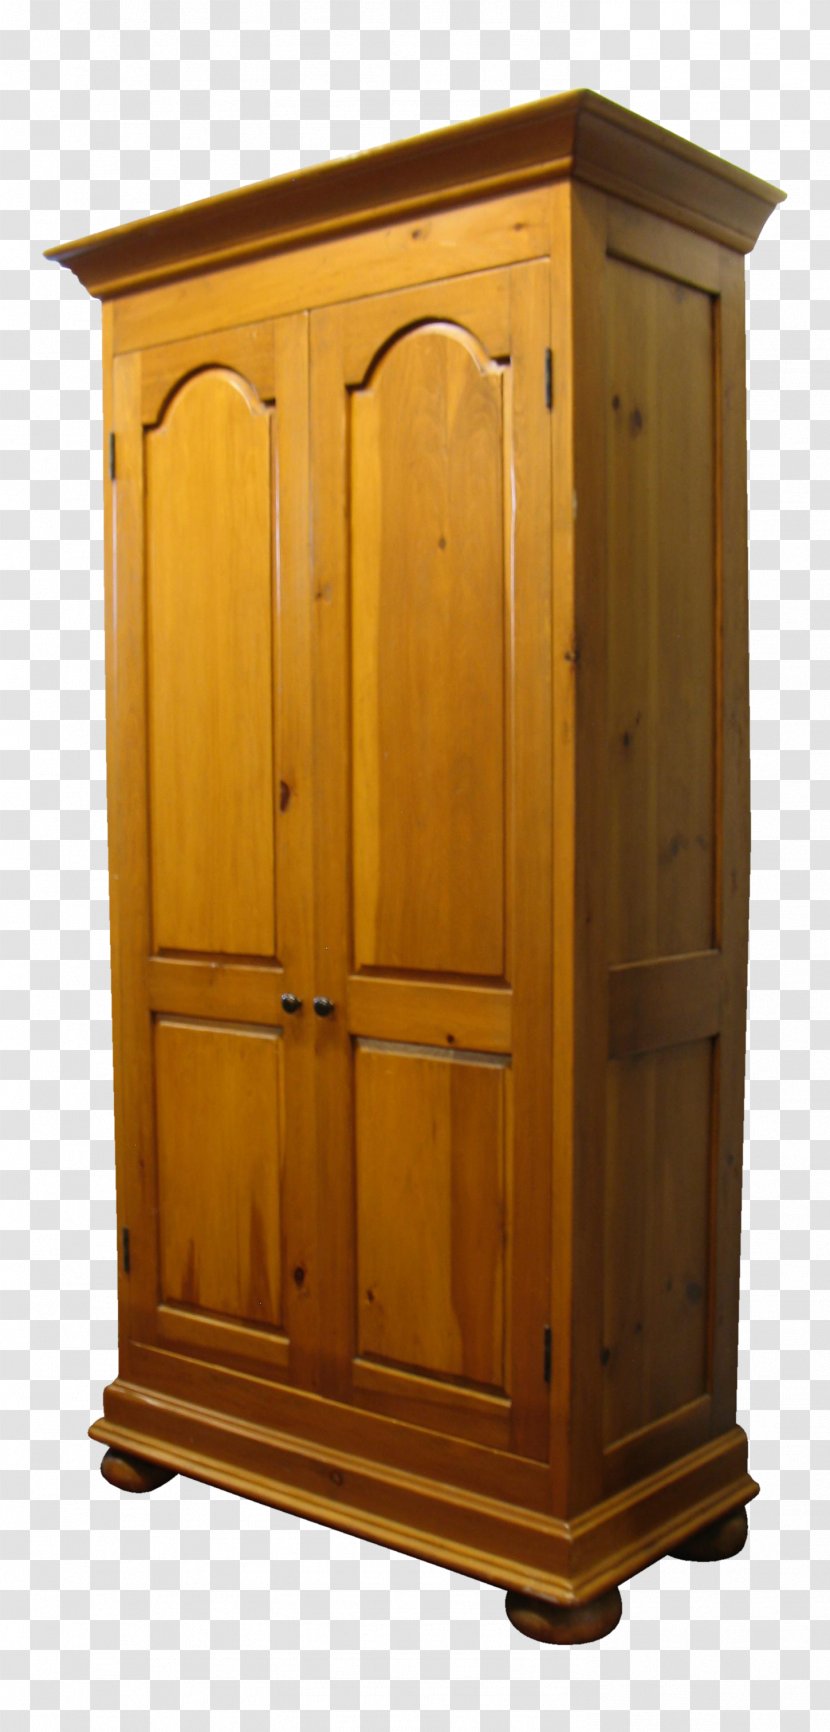 Armoires & Wardrobes Chiffonier Cupboard Wood Stain Cabinetry - Wardrobe - Wooden Guardrail Transparent PNG